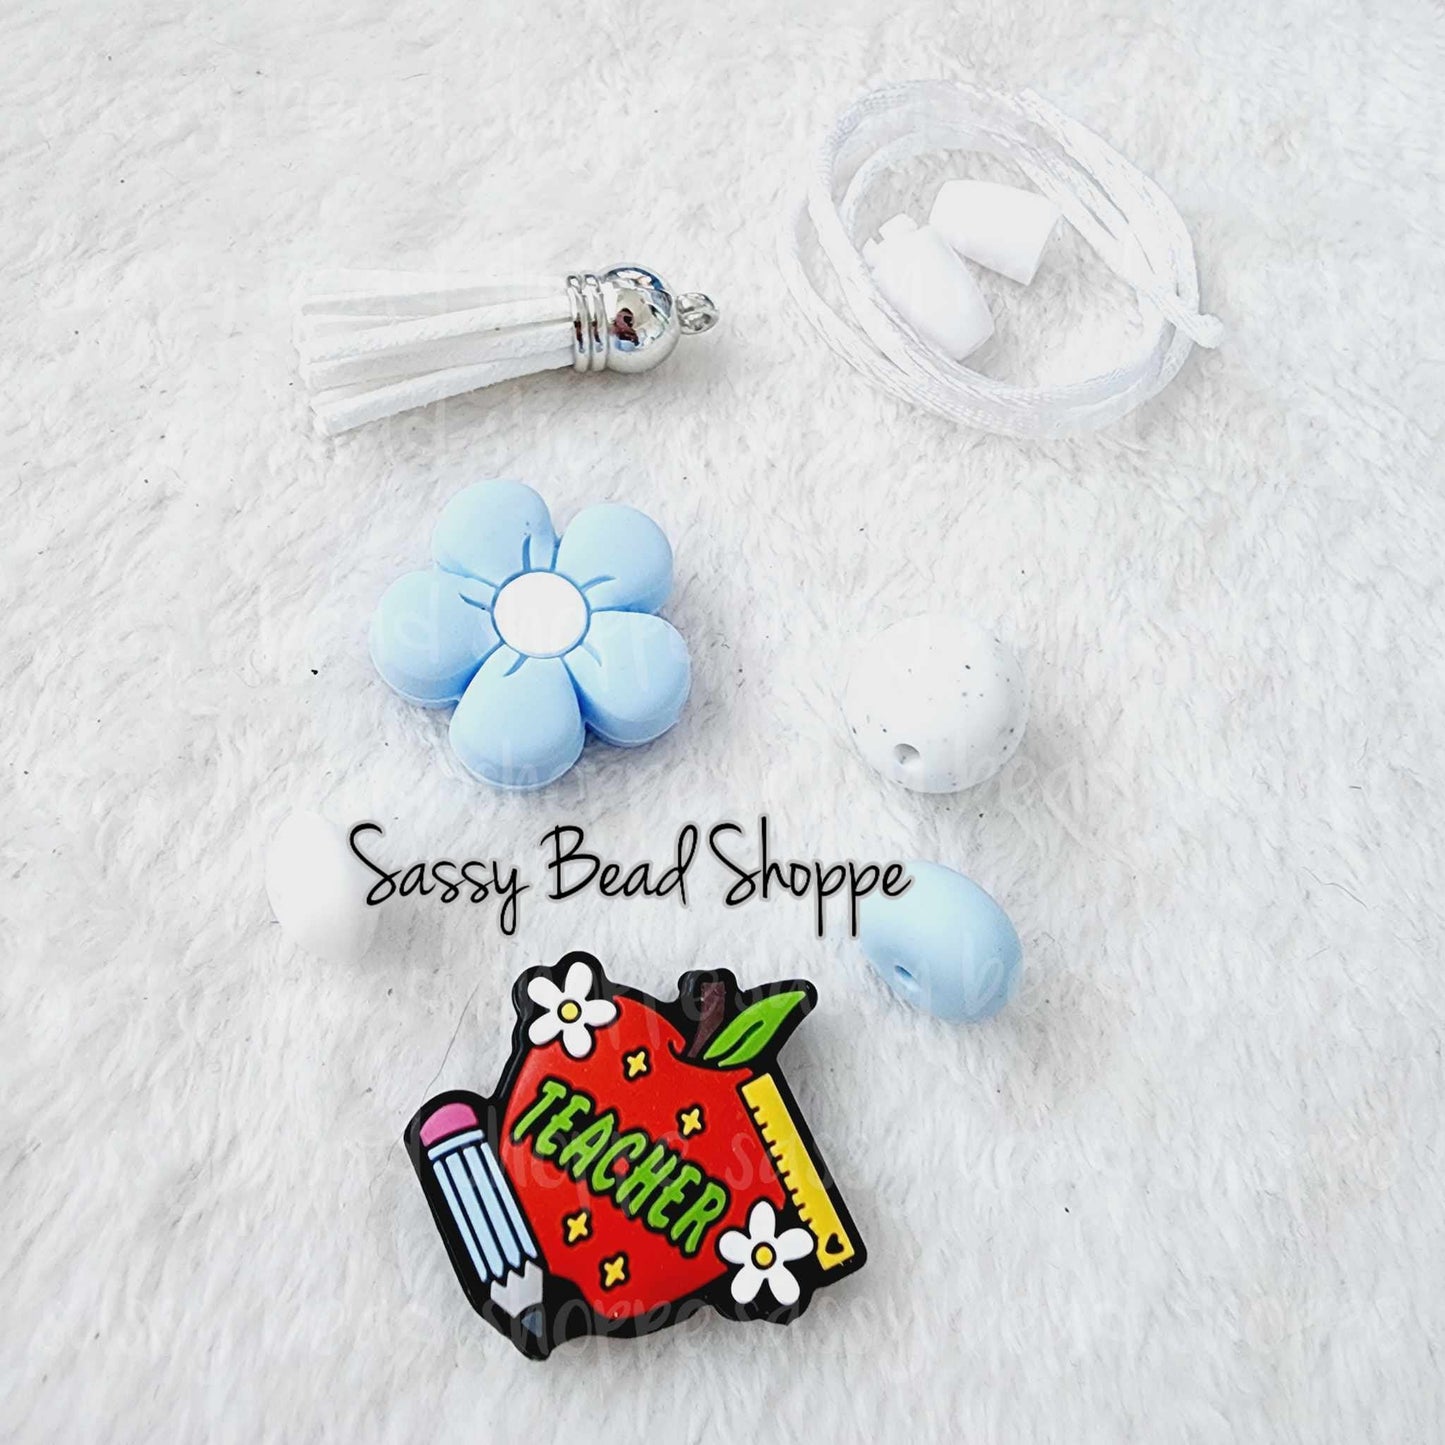 Sassy Bead Shoppe Groovy Teacher Car Charm What you will receive in your kit